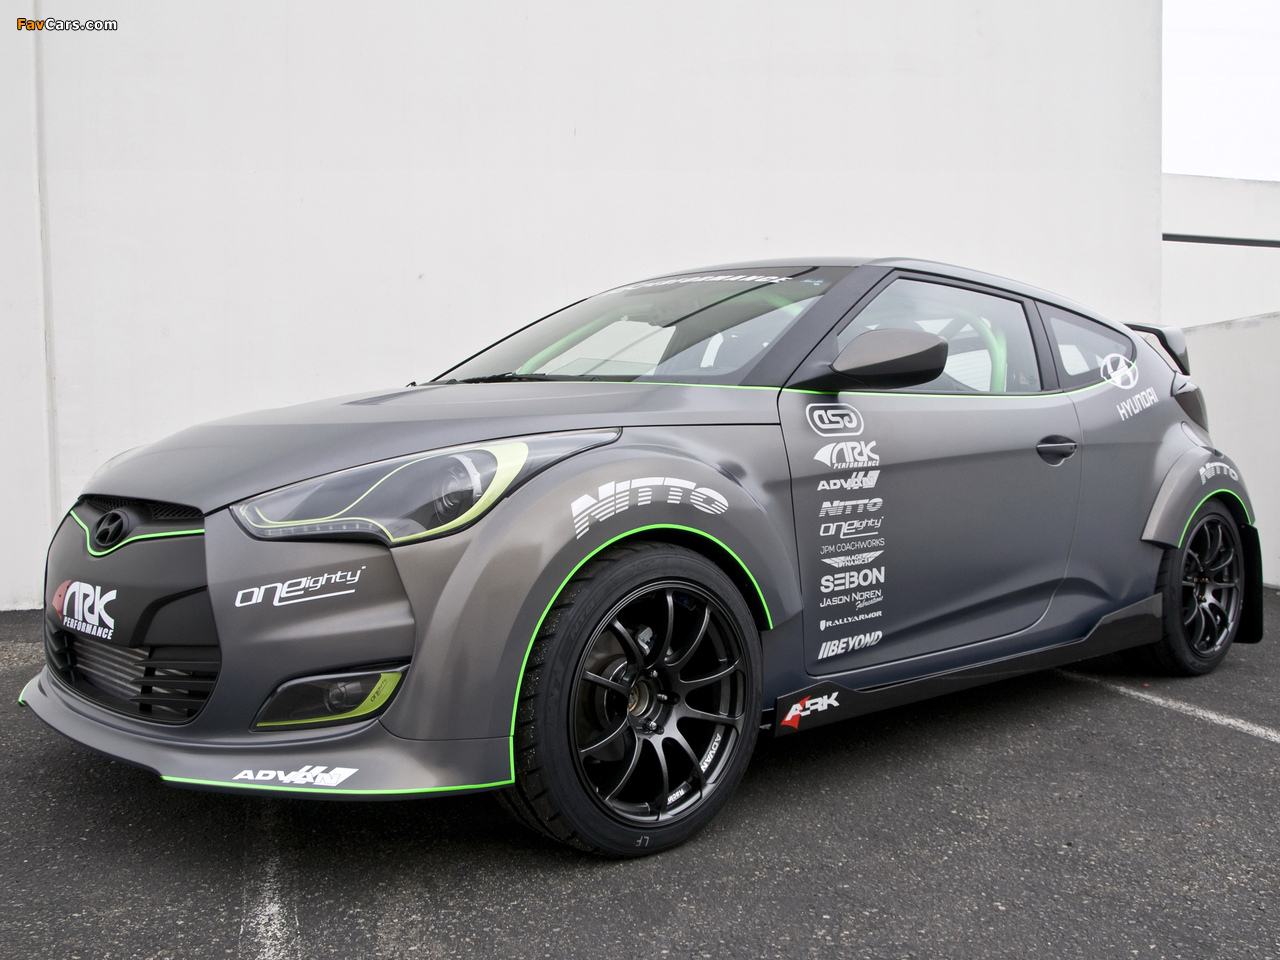 ARK Performance Hyundai Veloster 2011 pictures (1280 x 960)